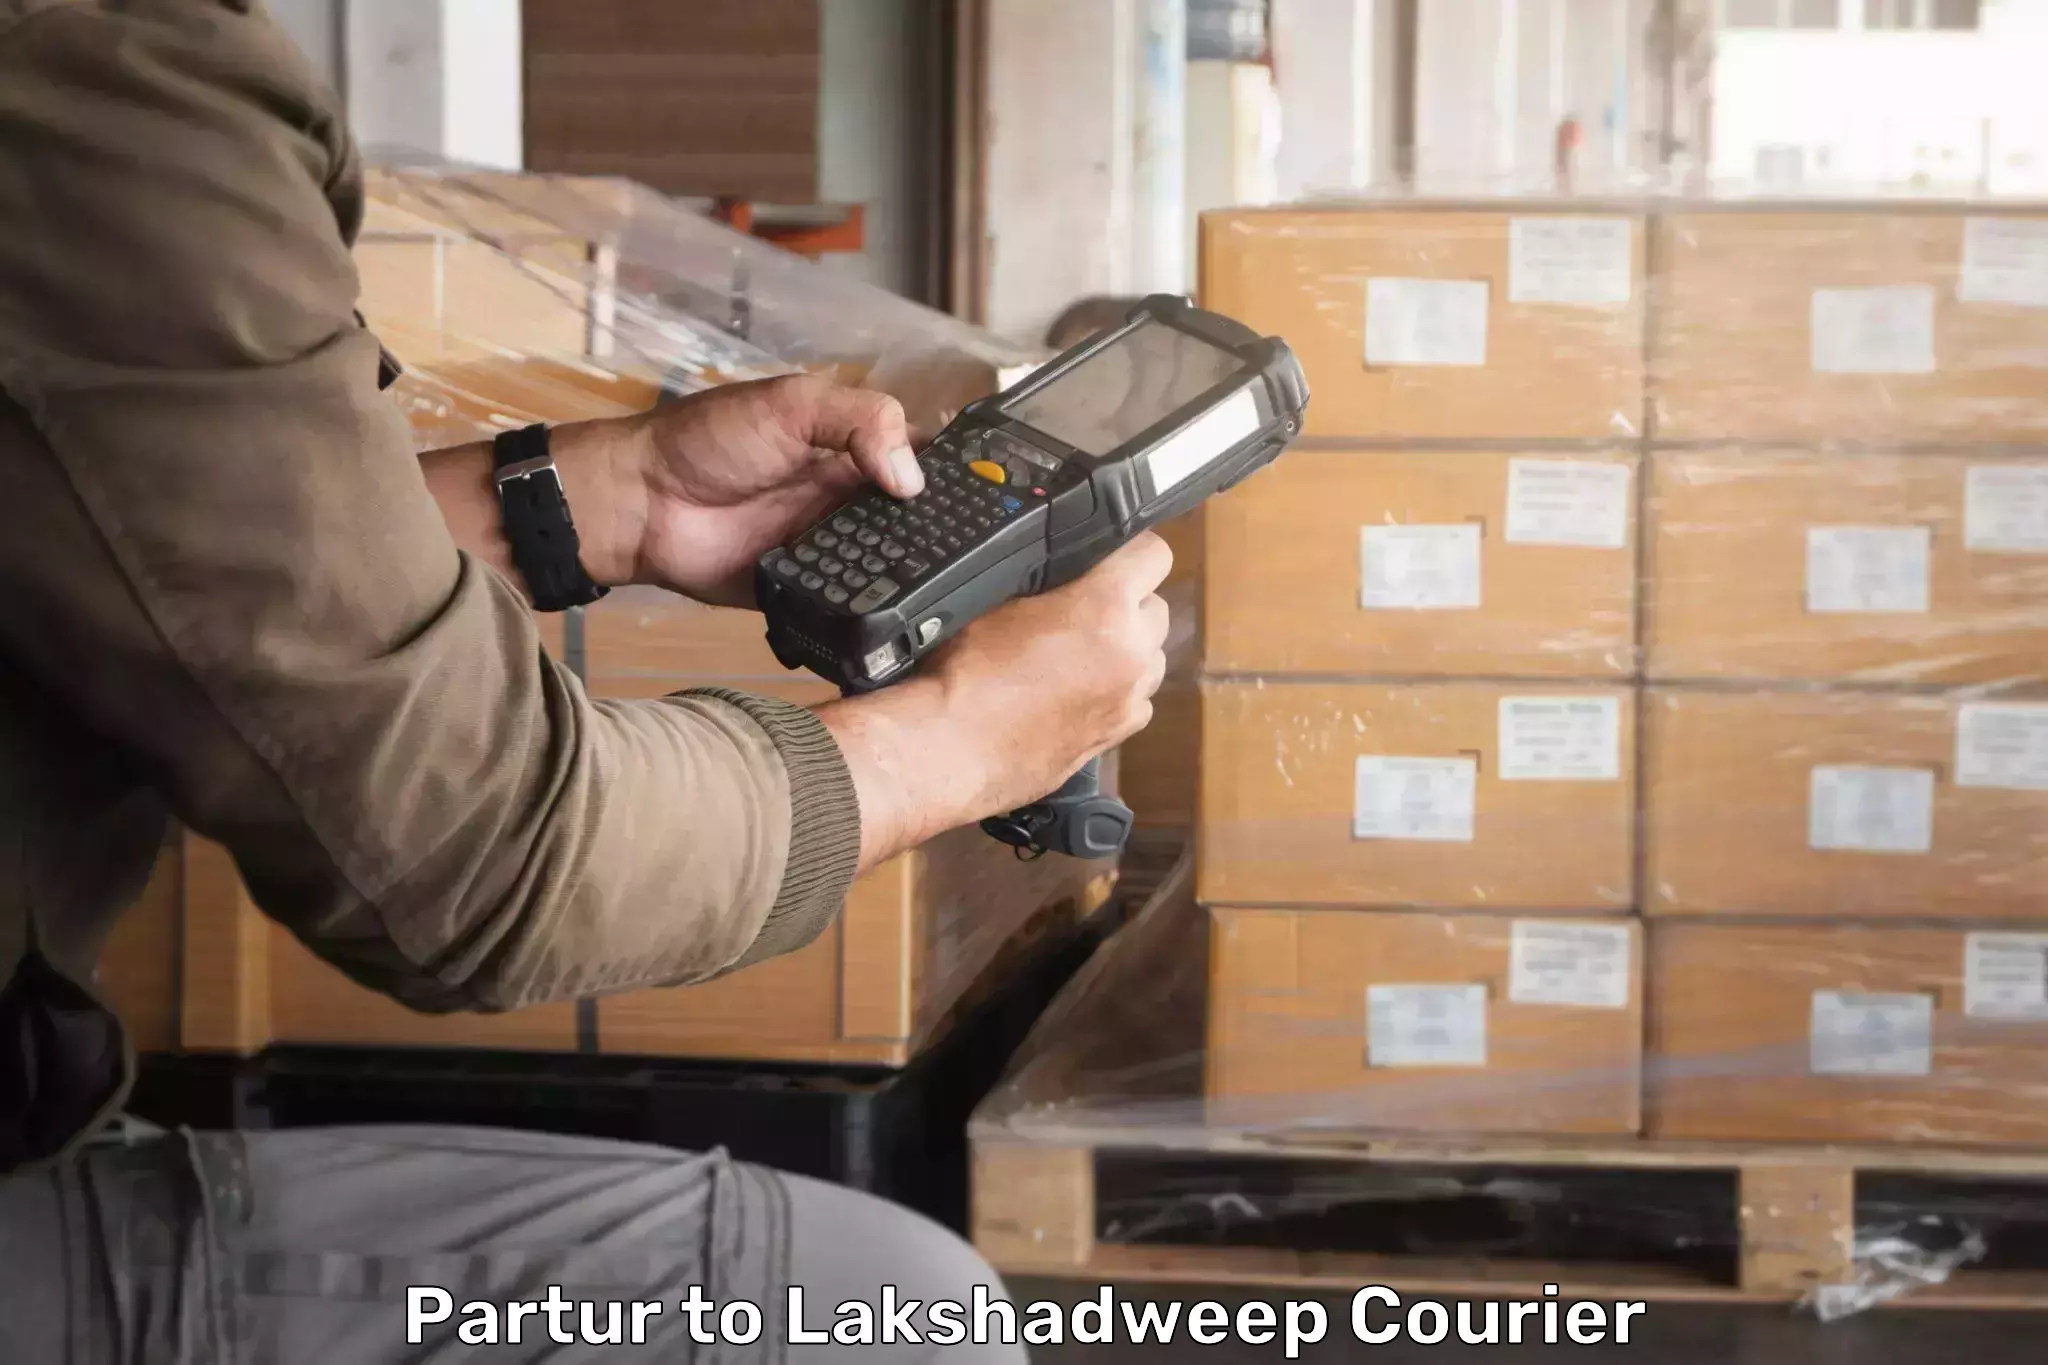 State-of-the-art courier technology Partur to Lakshadweep